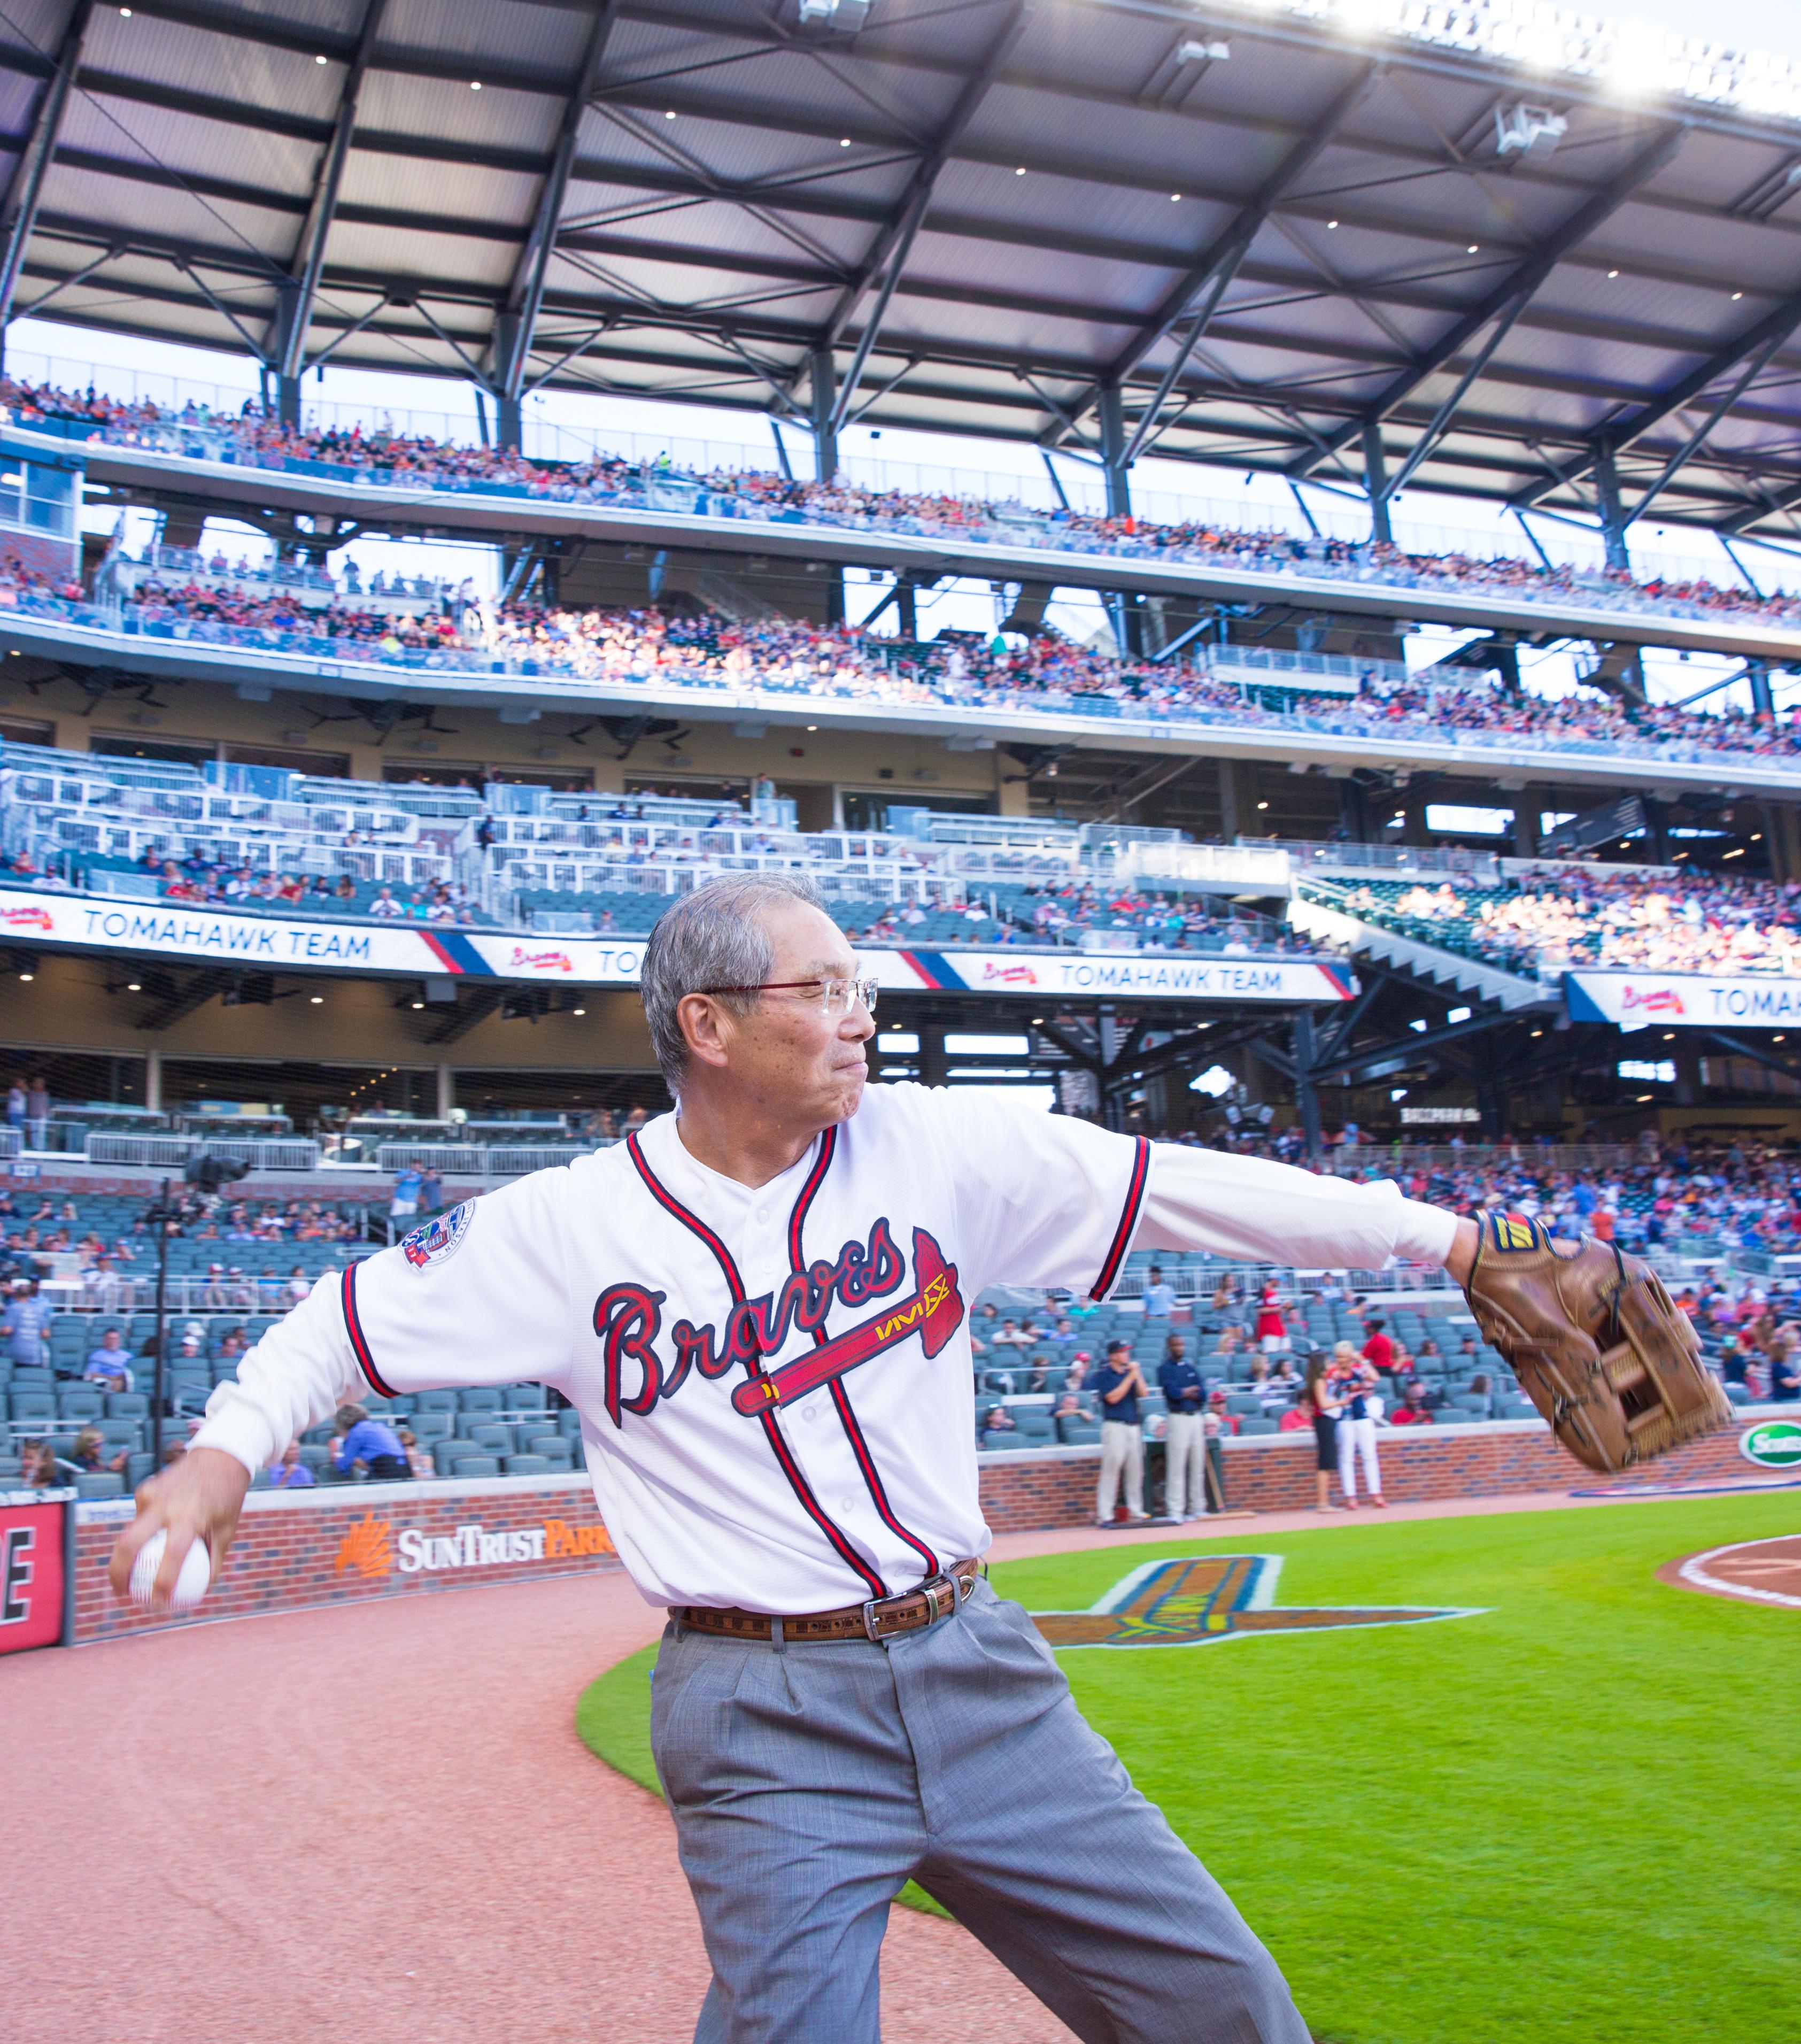 Representative Stanley Kao threw out the first pitch at SunTrust Park in Atlanta at a game between the Braves and Miami Marlins on June 16, 2017.